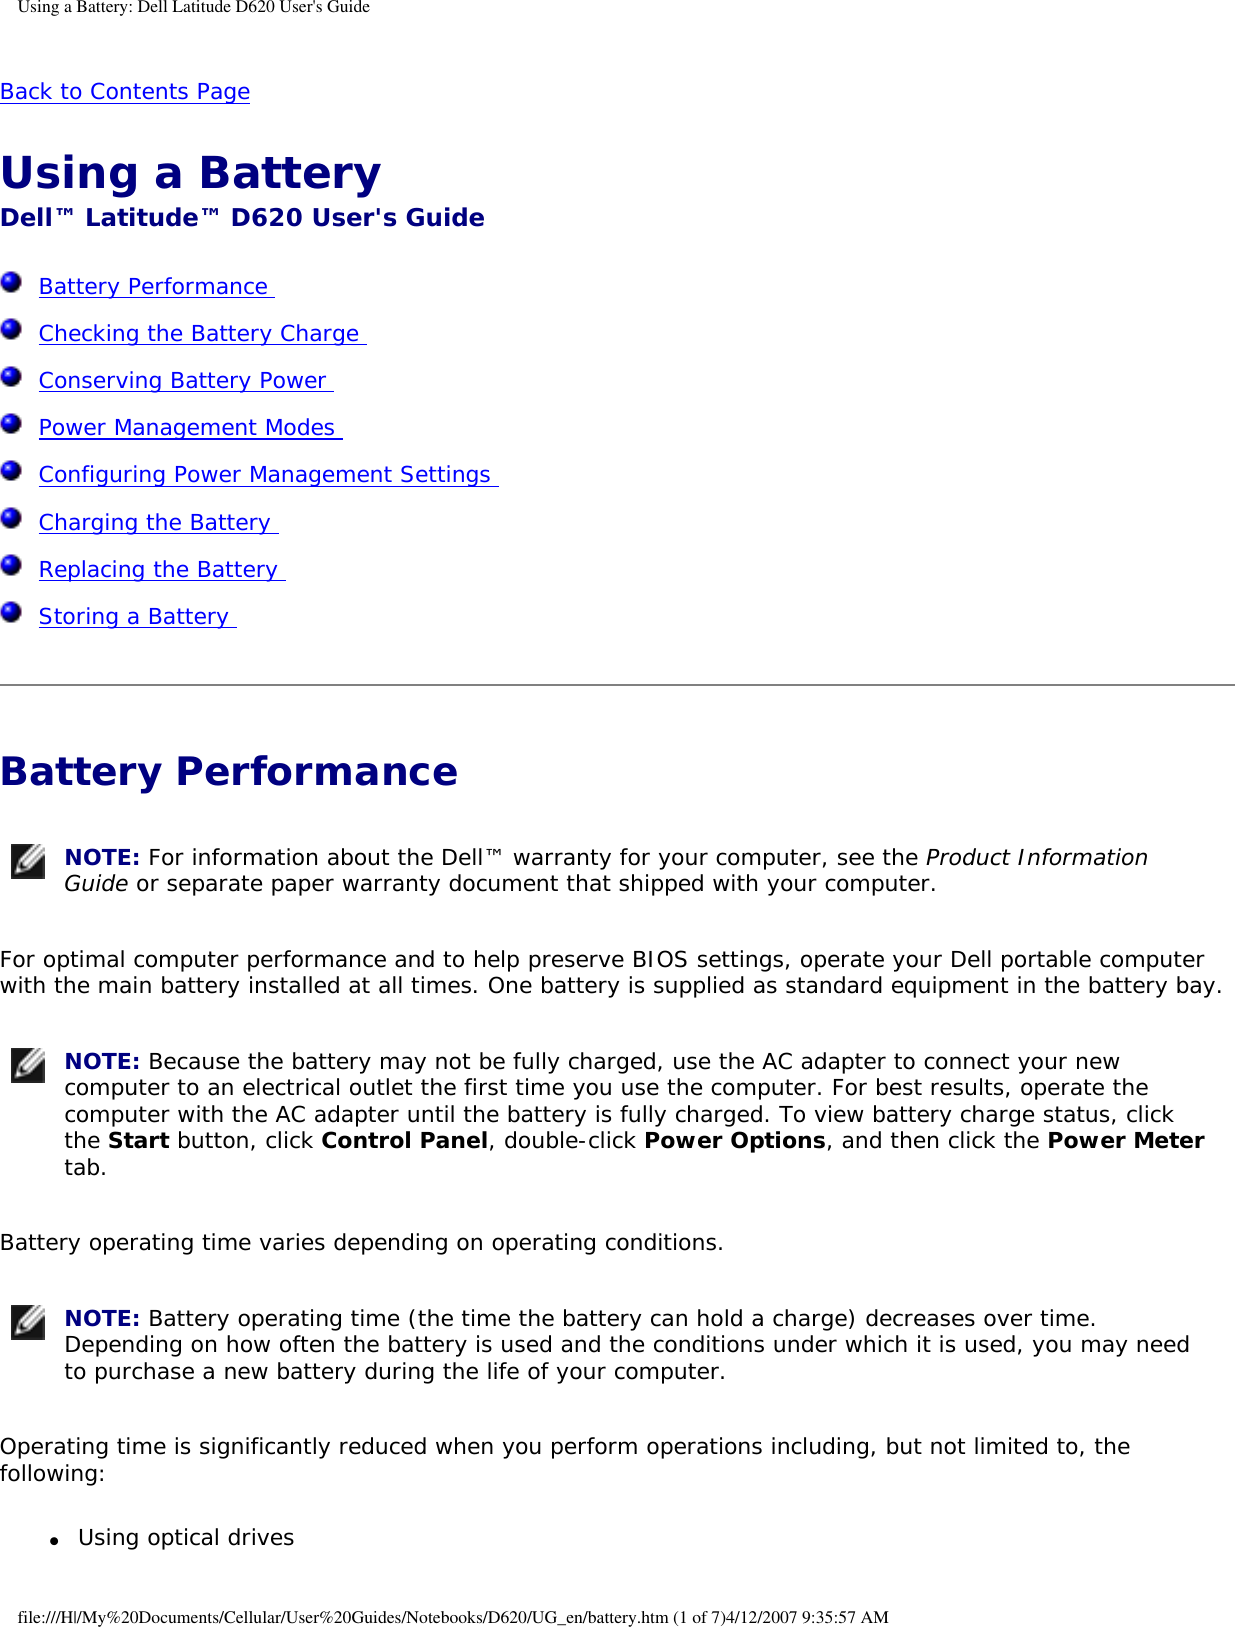 Using a Battery: Dell Latitude D620 User&apos;s GuideBack to Contents Page Using a Battery Dell™ Latitude™ D620 User&apos;s Guide  Battery Performance   Checking the Battery Charge   Conserving Battery Power   Power Management Modes   Configuring Power Management Settings   Charging the Battery   Replacing the Battery   Storing a Battery  Battery Performance  NOTE: For information about the Dell™ warranty for your computer, see the Product Information Guide or separate paper warranty document that shipped with your computer.For optimal computer performance and to help preserve BIOS settings, operate your Dell portable computer with the main battery installed at all times. One battery is supplied as standard equipment in the battery bay. NOTE: Because the battery may not be fully charged, use the AC adapter to connect your new computer to an electrical outlet the first time you use the computer. For best results, operate the computer with the AC adapter until the battery is fully charged. To view battery charge status, click the Start button, click Control Panel, double-click Power Options, and then click the Power Meter tab.Battery operating time varies depending on operating conditions.  NOTE: Battery operating time (the time the battery can hold a charge) decreases over time. Depending on how often the battery is used and the conditions under which it is used, you may need to purchase a new battery during the life of your computer.Operating time is significantly reduced when you perform operations including, but not limited to, the following:●     Using optical drives file:///H|/My%20Documents/Cellular/User%20Guides/Notebooks/D620/UG_en/battery.htm (1 of 7)4/12/2007 9:35:57 AM